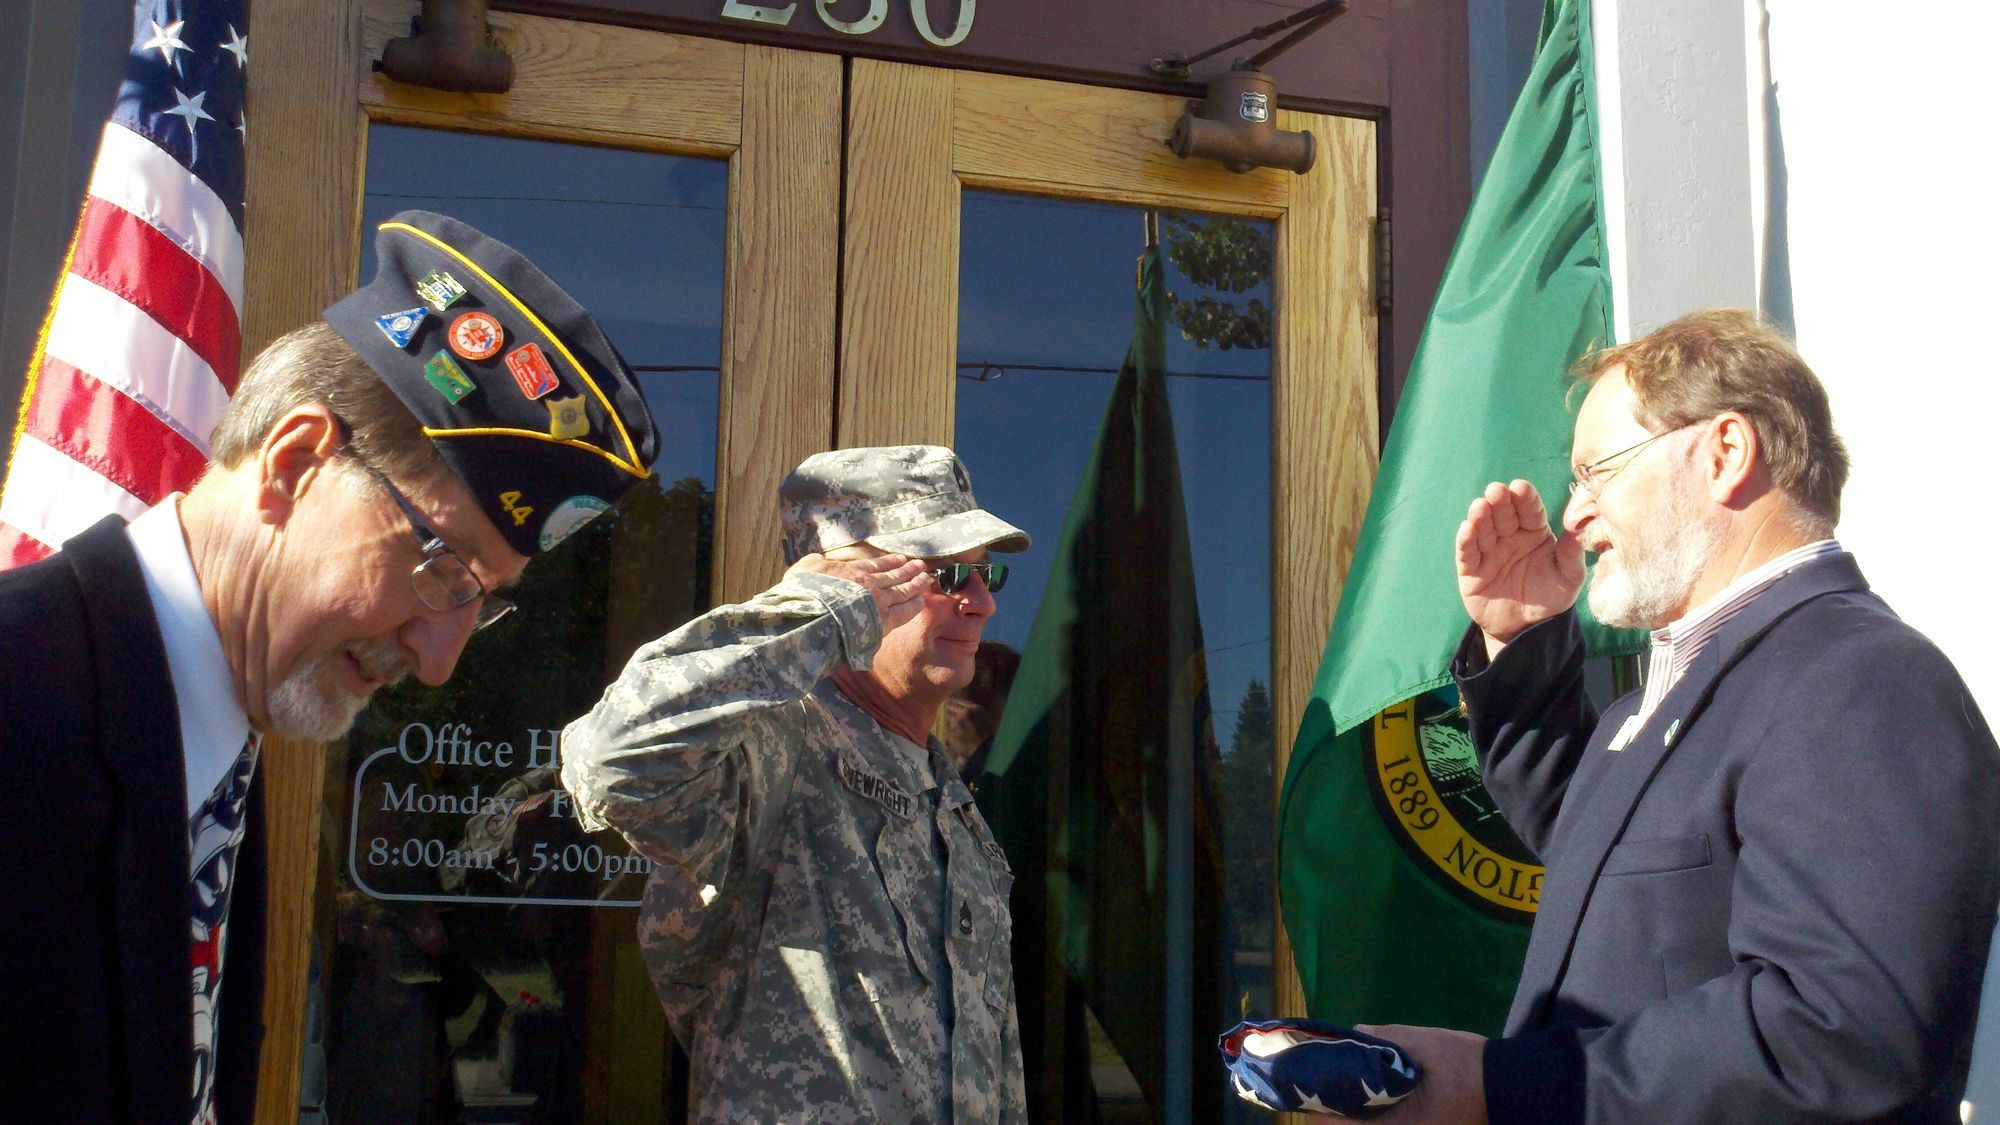 Army Sgt. 1st Class David Sivewright, center, presents the flag he carried more than 2,000 miles to Ridgefield City Councilman Darren Wertz, right, on the steps of Ridgefield City Hall.